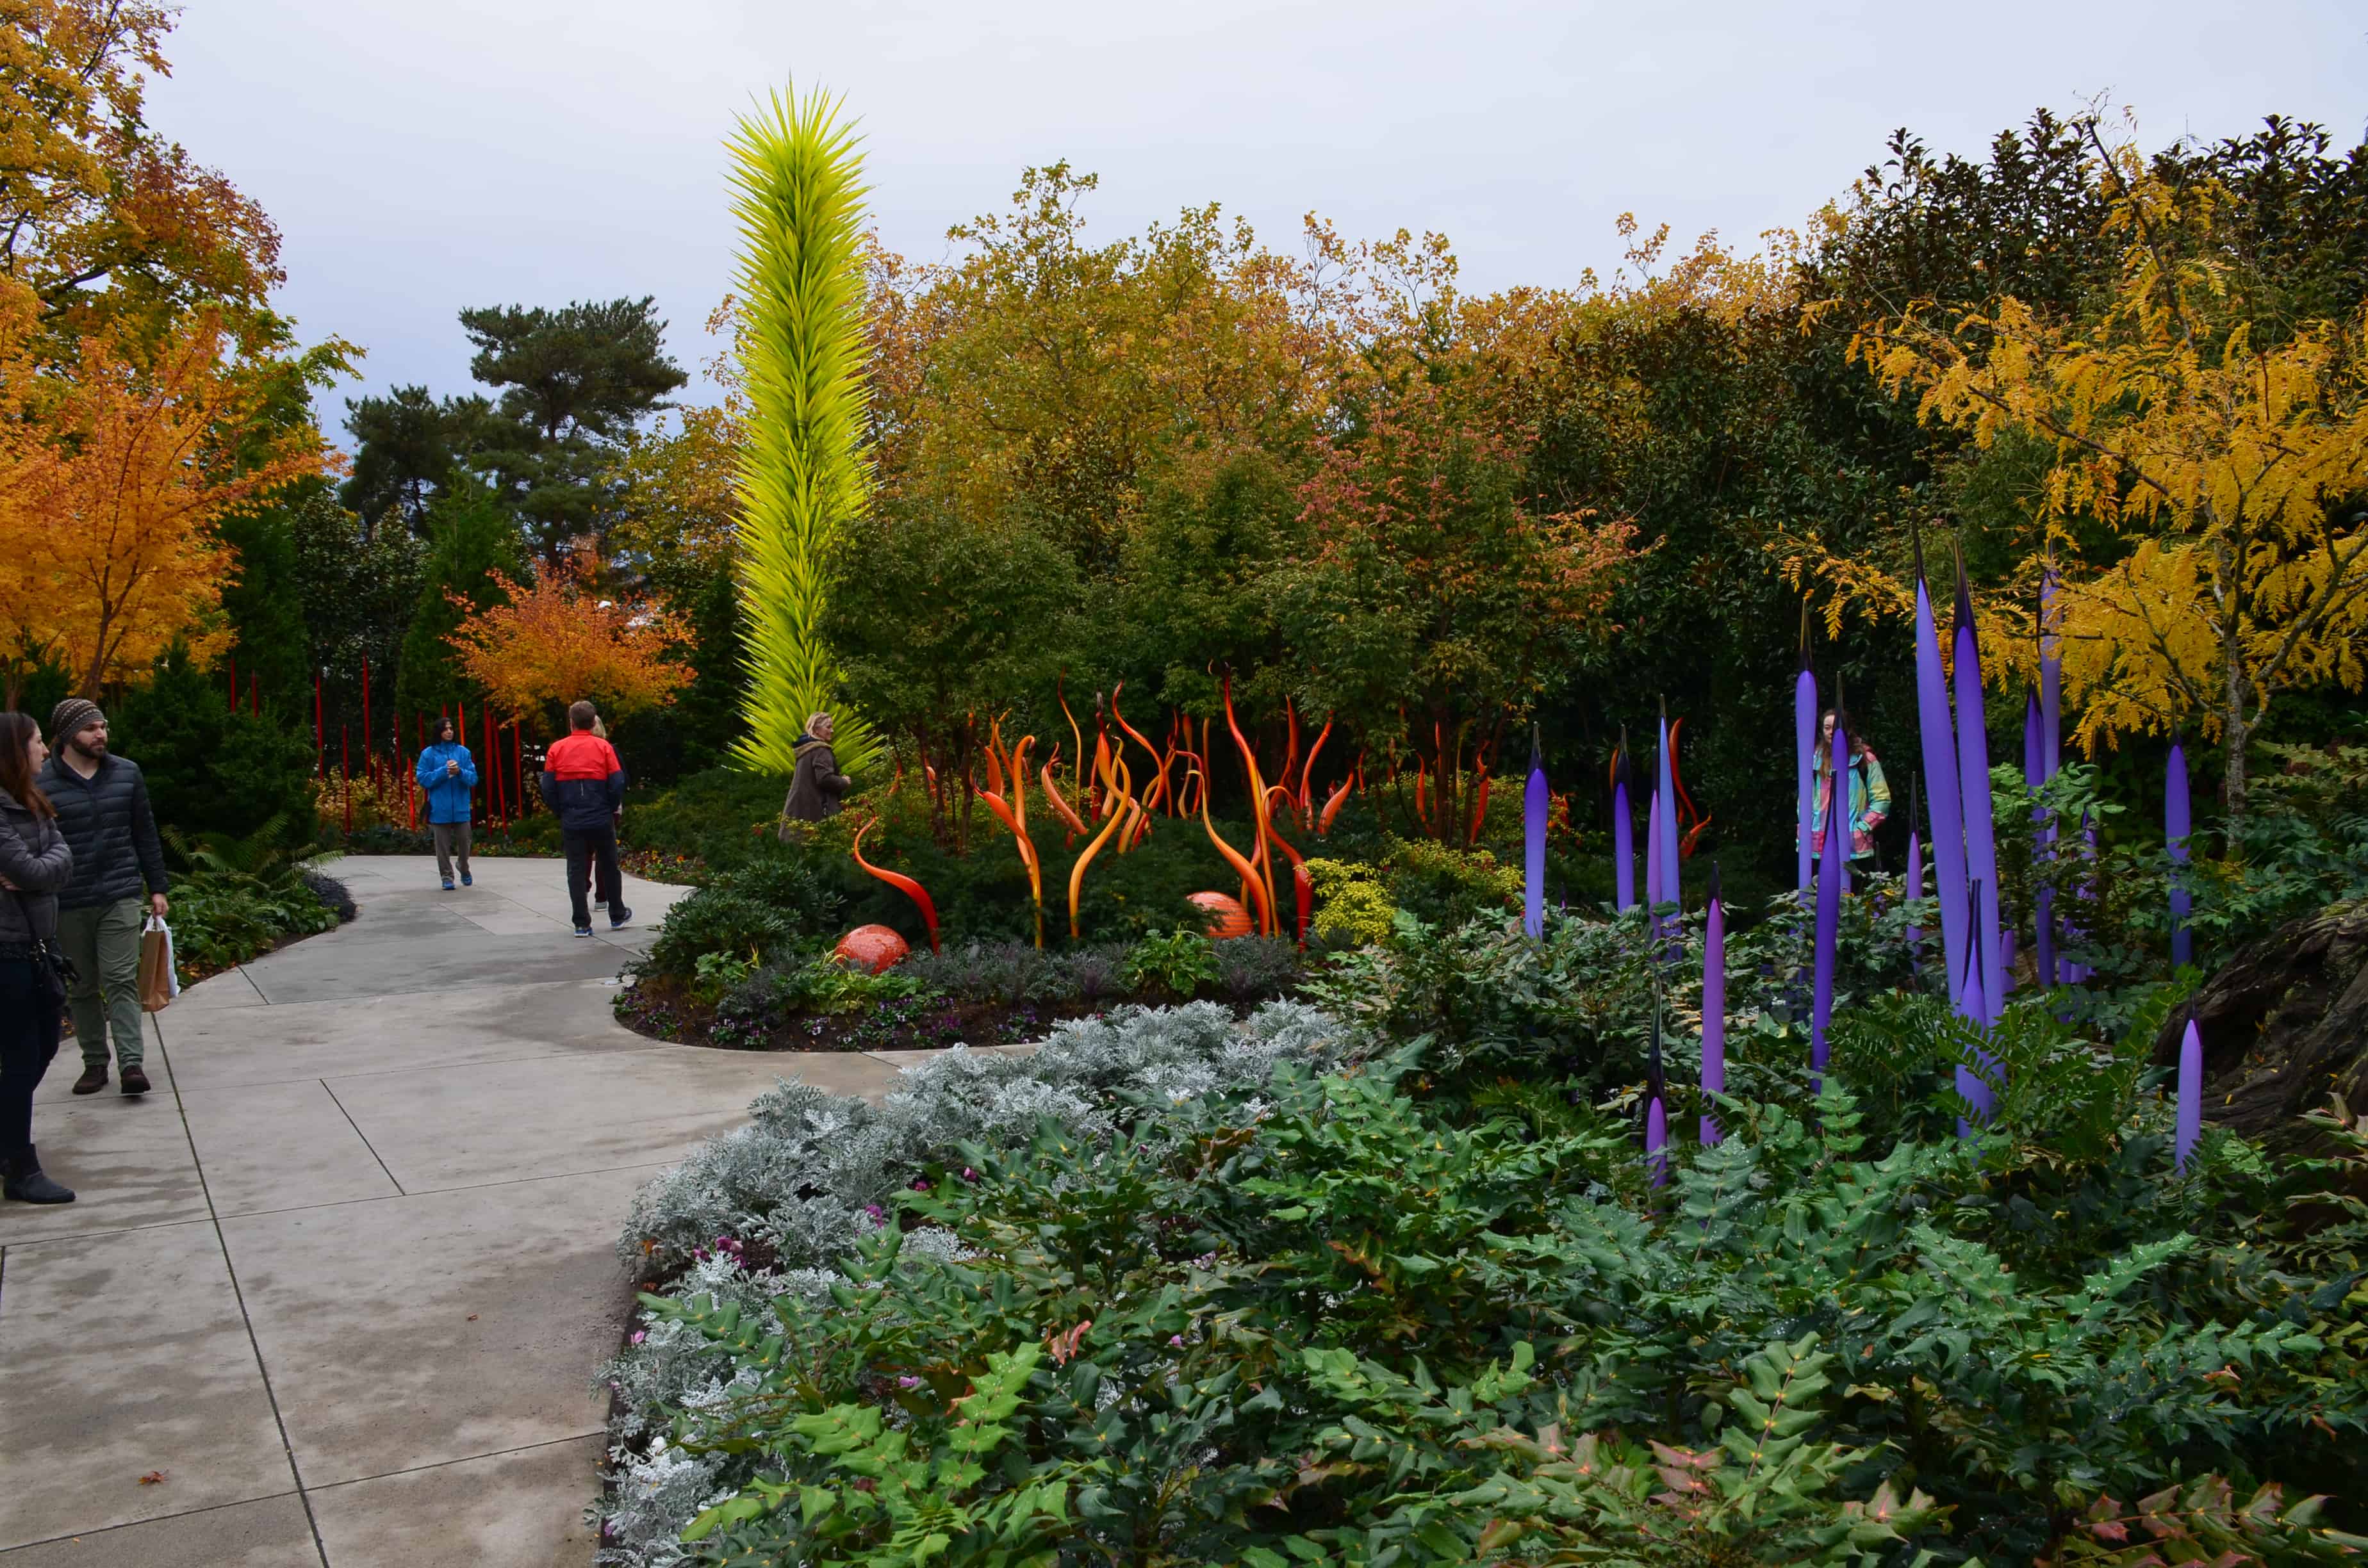 Garden at Chihuly Garden and Glass in Seattle, Washington